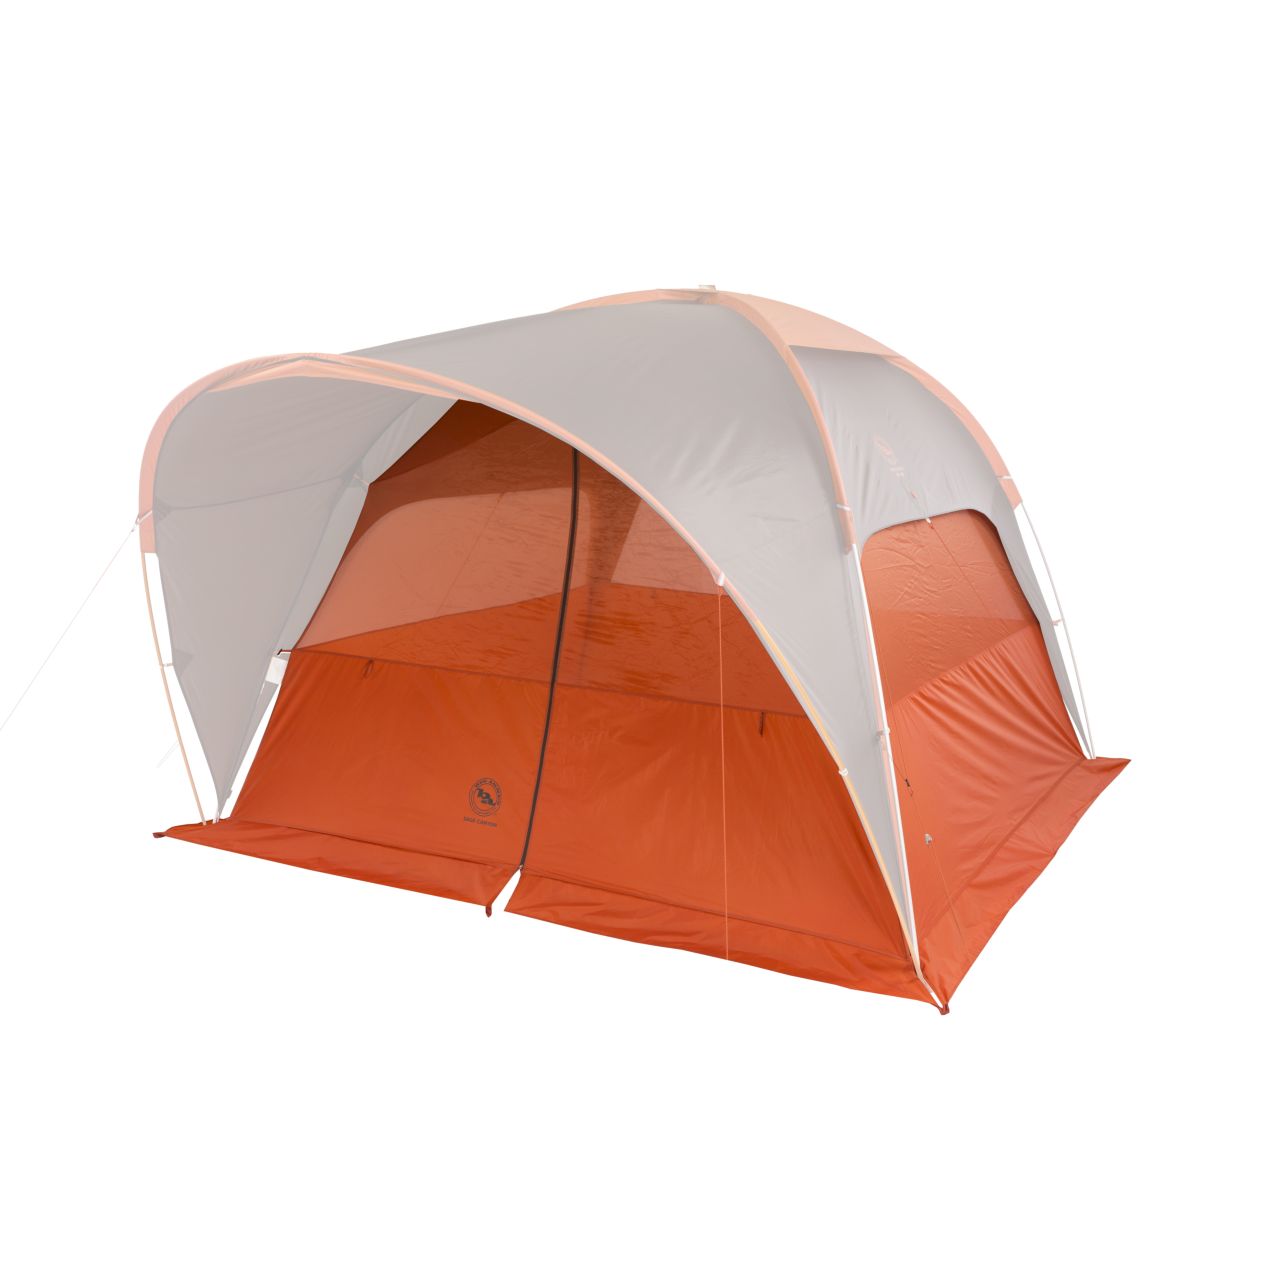 Mesh Insert with Sage Canyon Shelter Deluxe - shelter sold separately